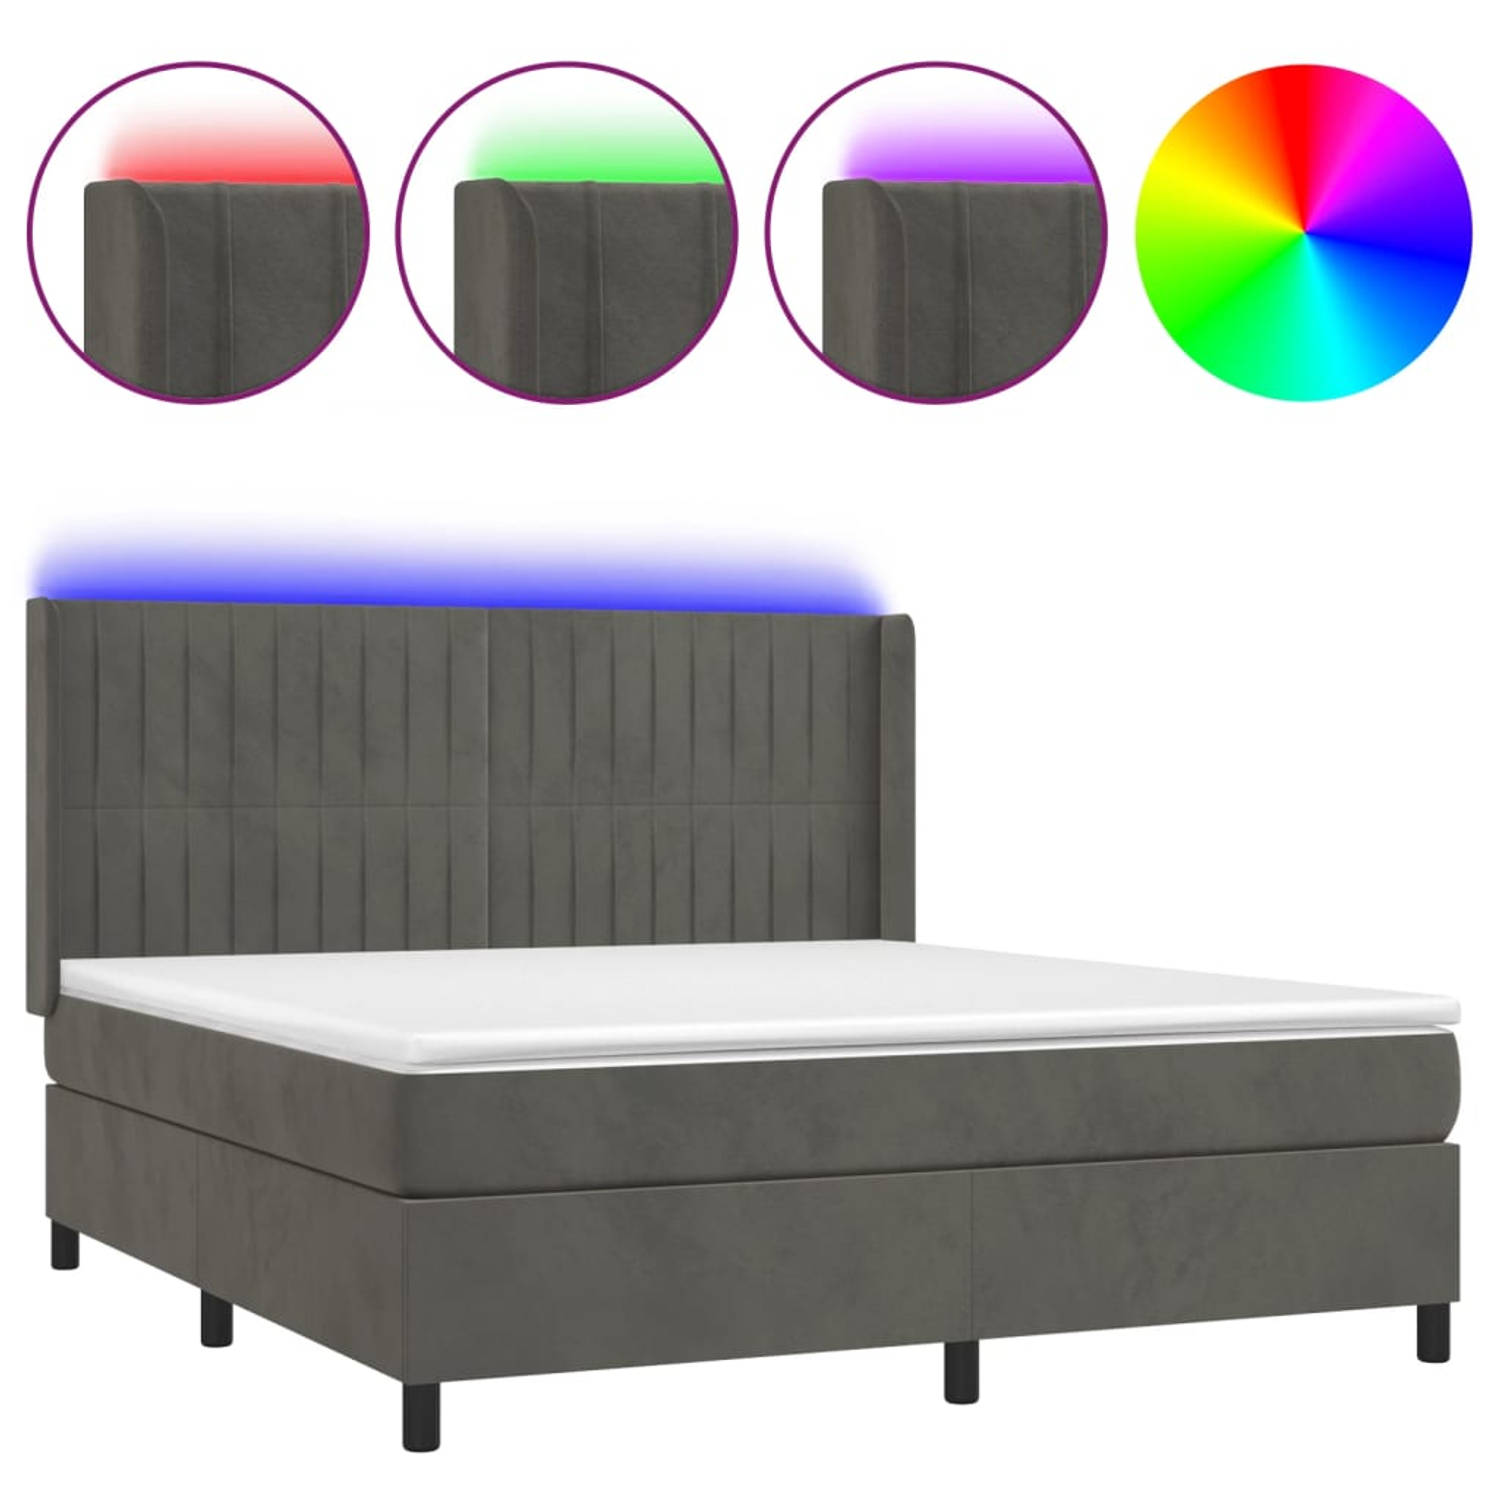 The Living Store Boxspring Bed - Fluweel - 180 x 200 cm - met LED